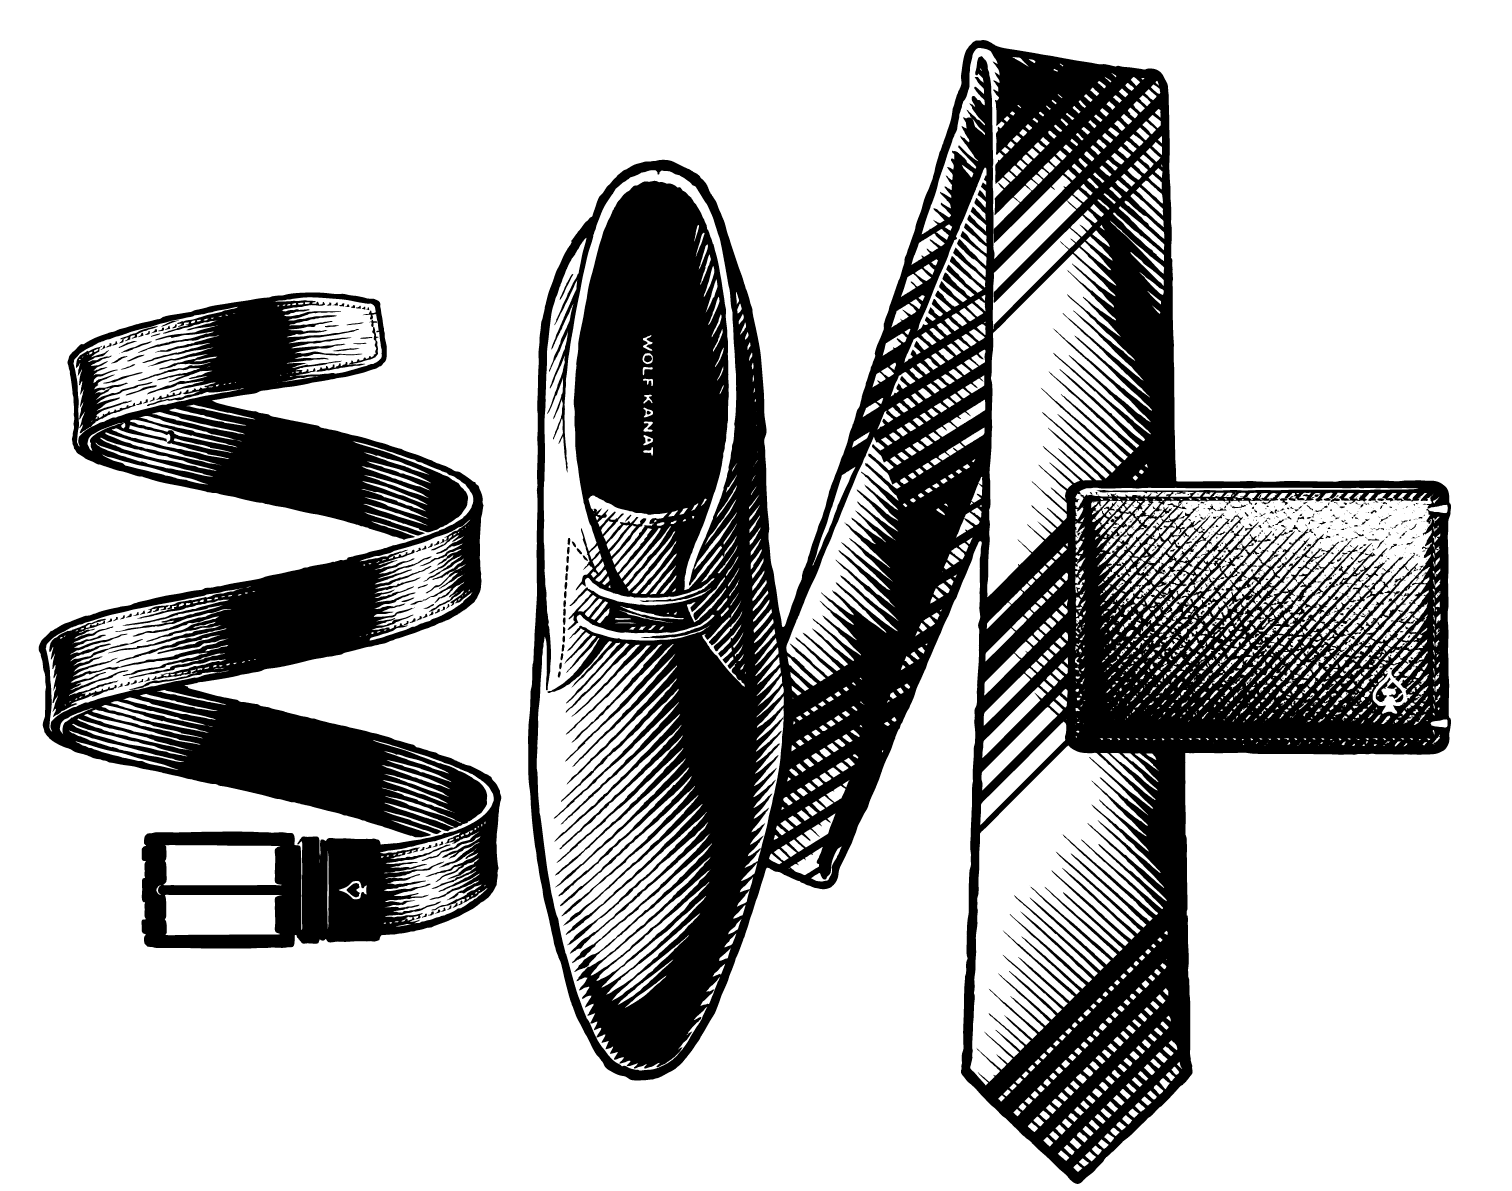 A belt, a tie, a show and a wallet, drawn with pen and ink